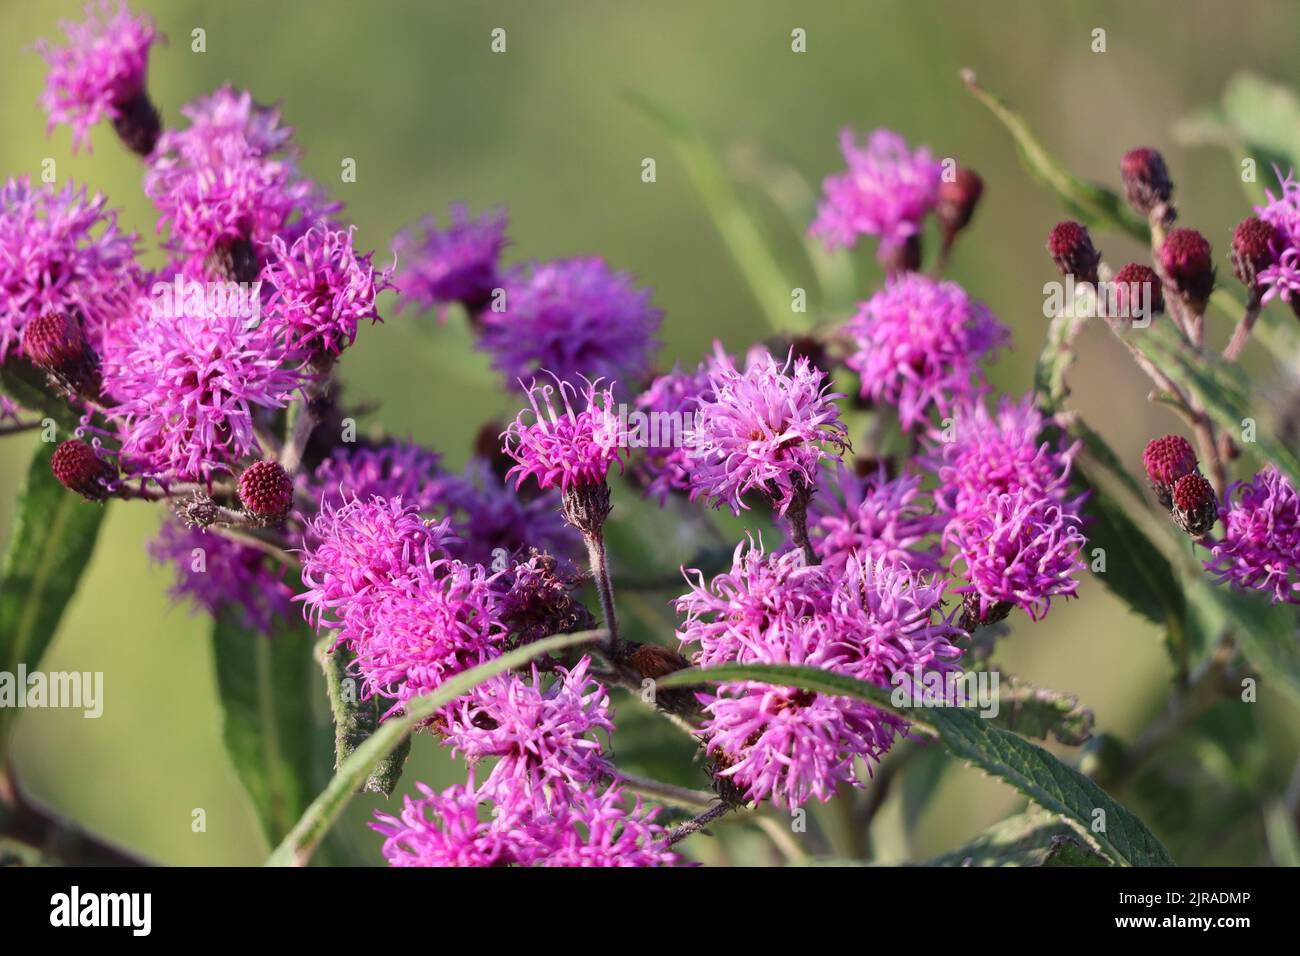 Field with blooming Iron weed Stock Photo